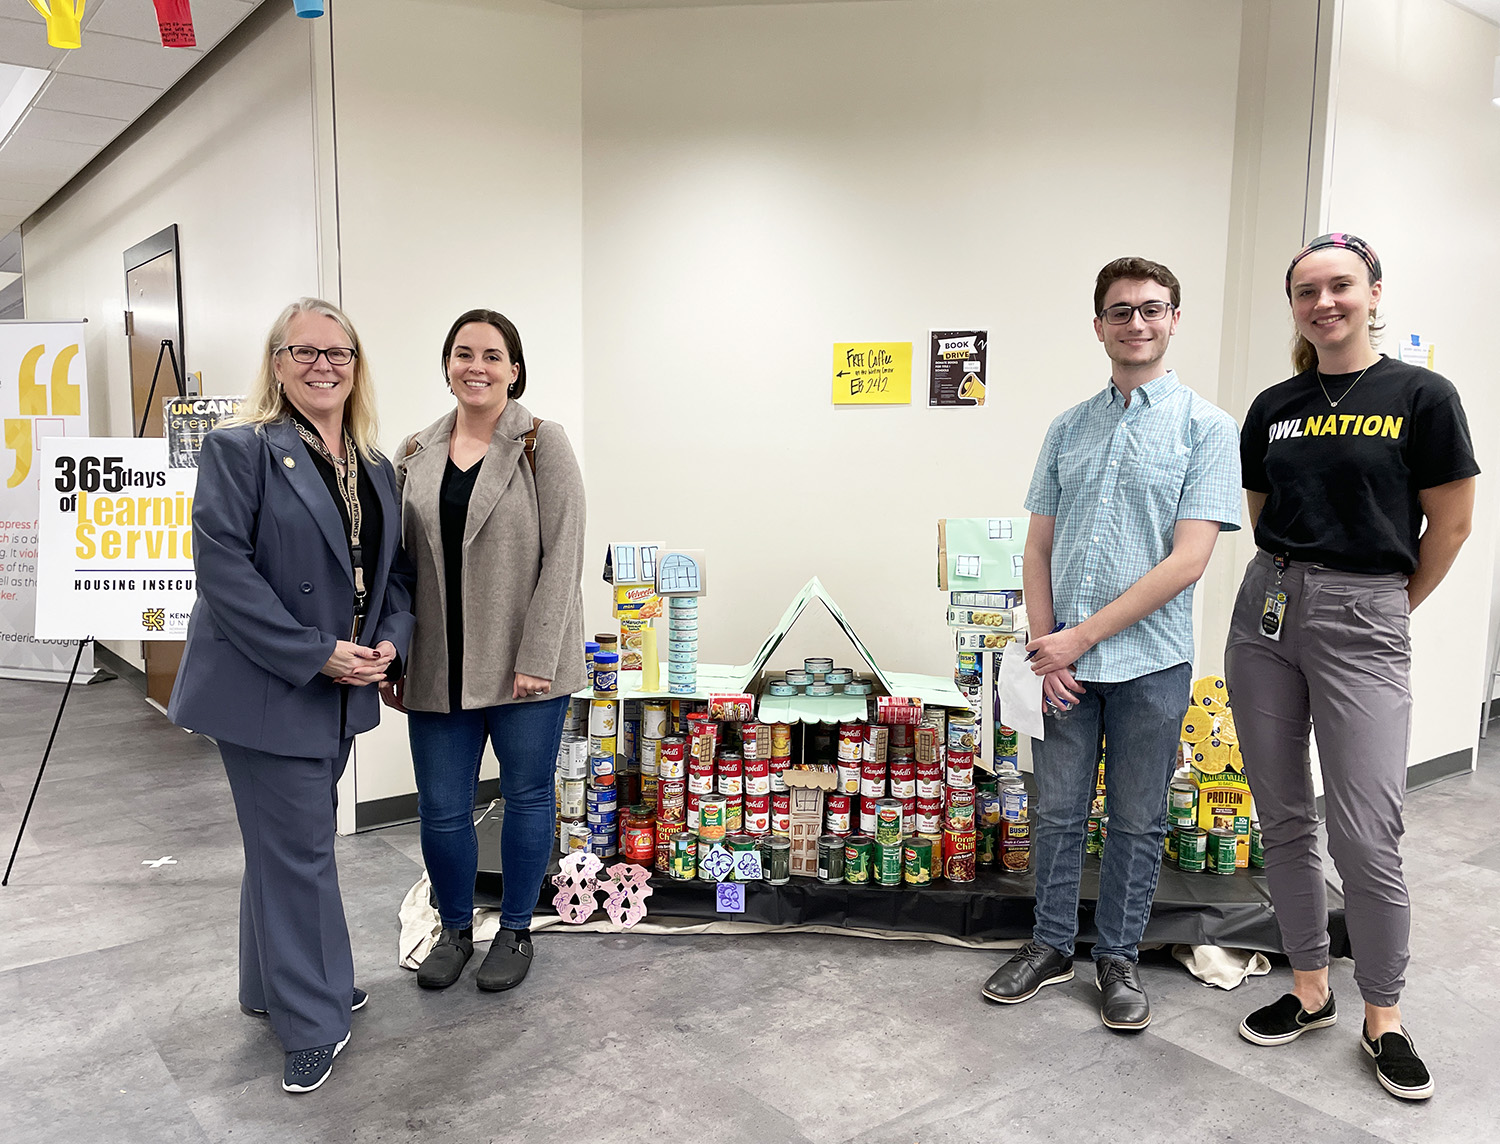 Dean Kaukinen with the runner up team in front of their can structure.